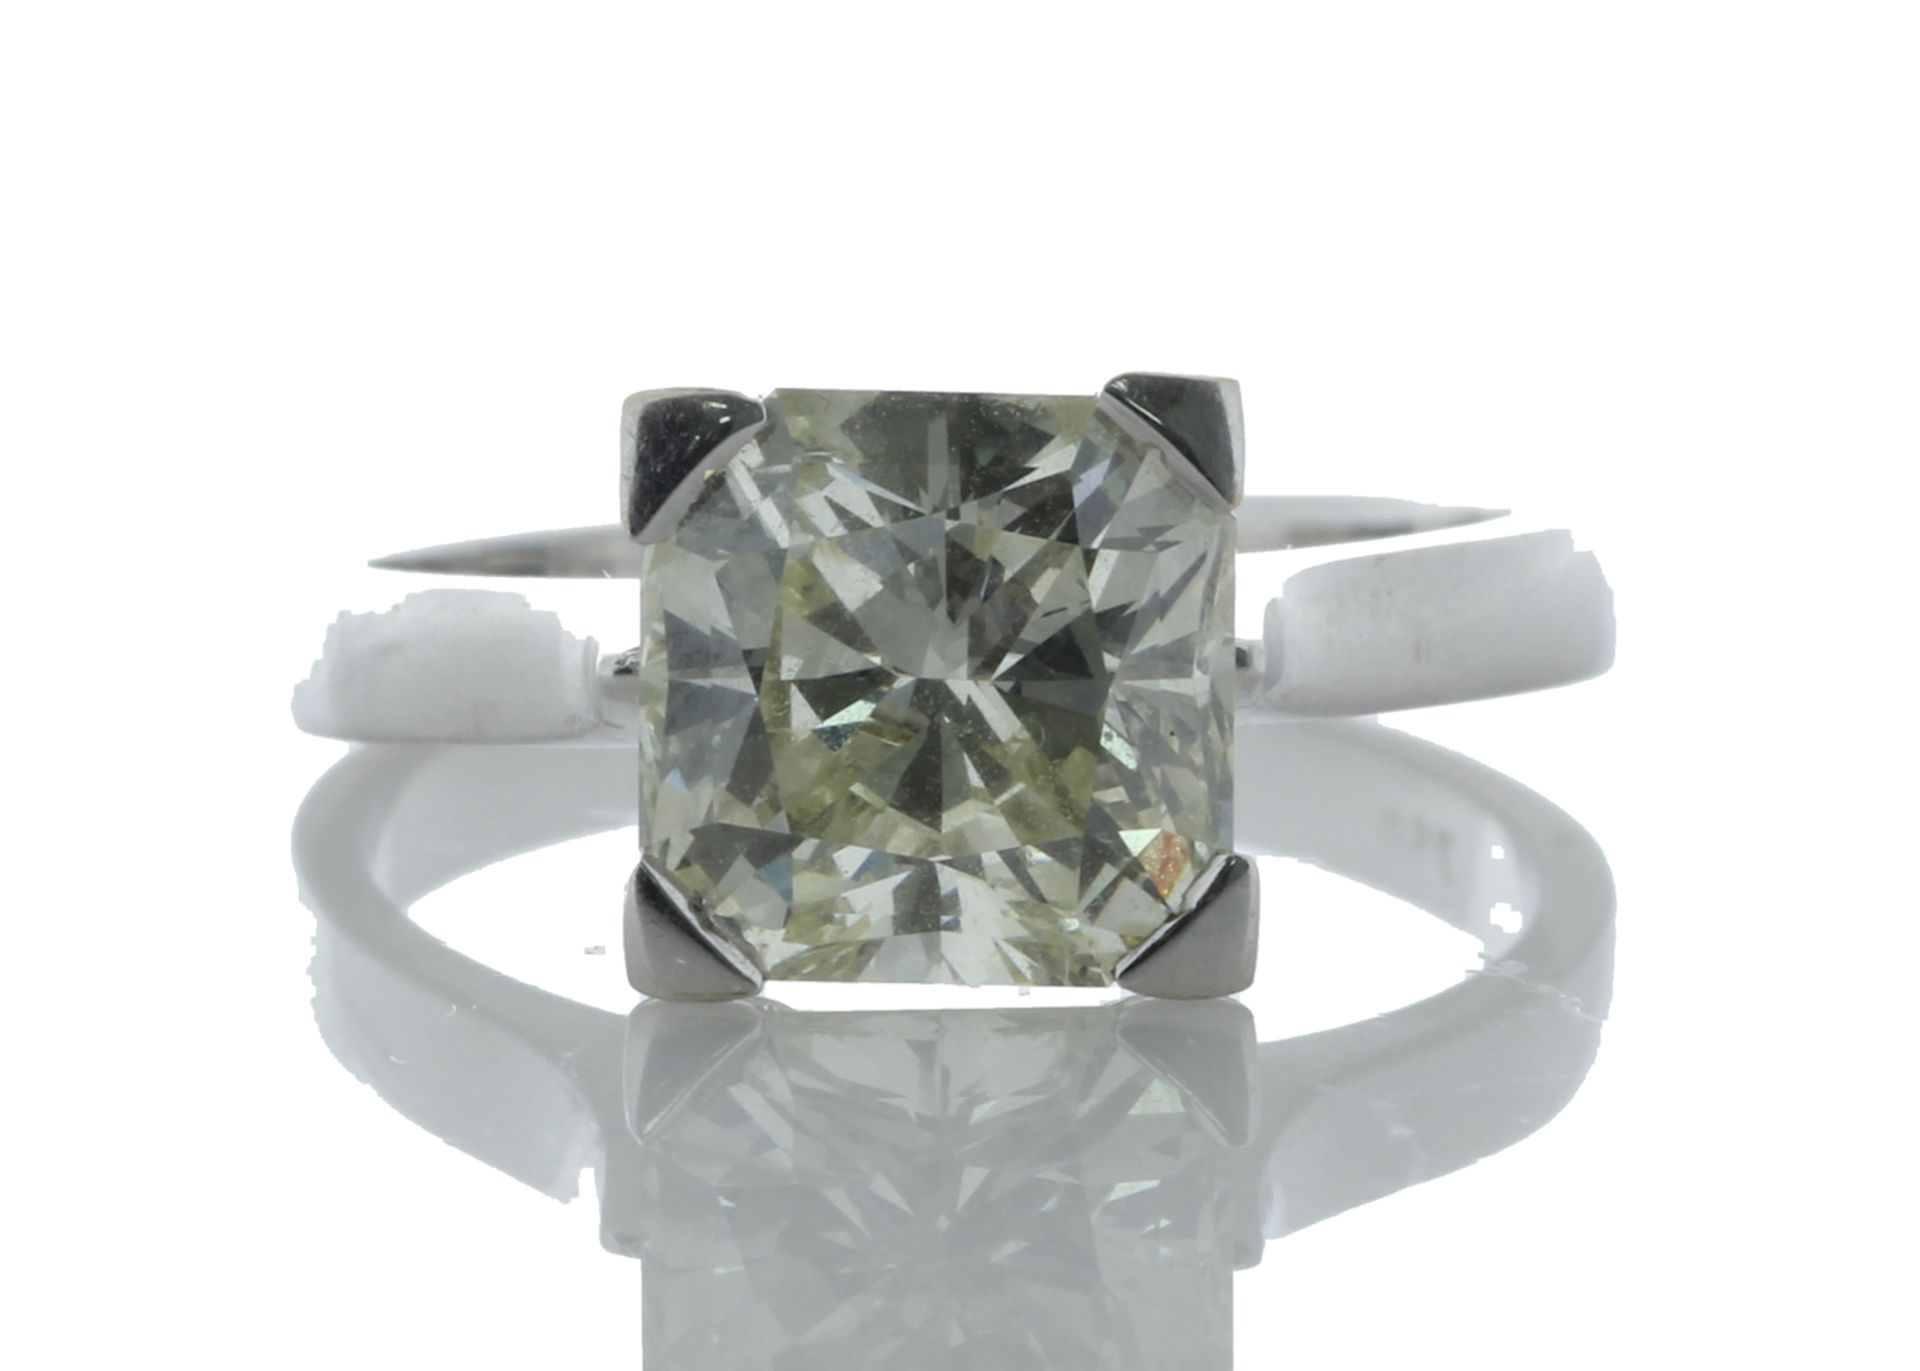 18ct White Gold Single Stone Radiant Cut Diamond Ring 3.02 Carats - Valued by GIE £89,540.00 -